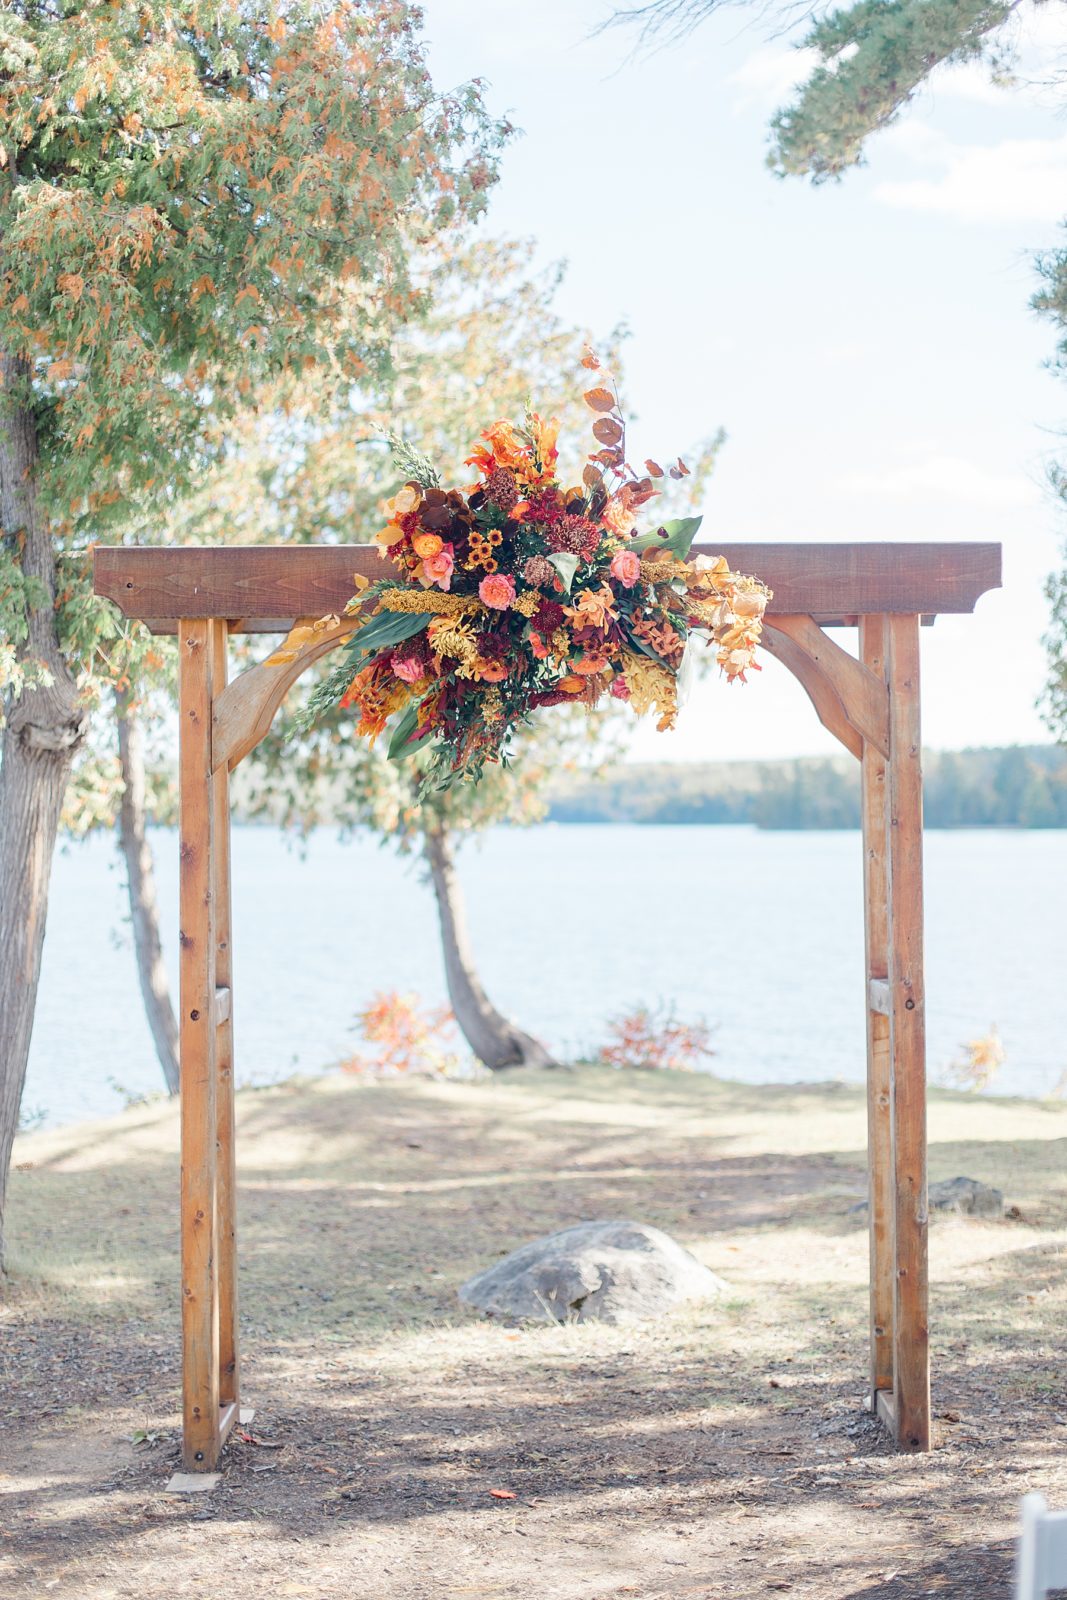 Ceremony Placement Tips for Backyard Weddings - Brittany Navin Photo